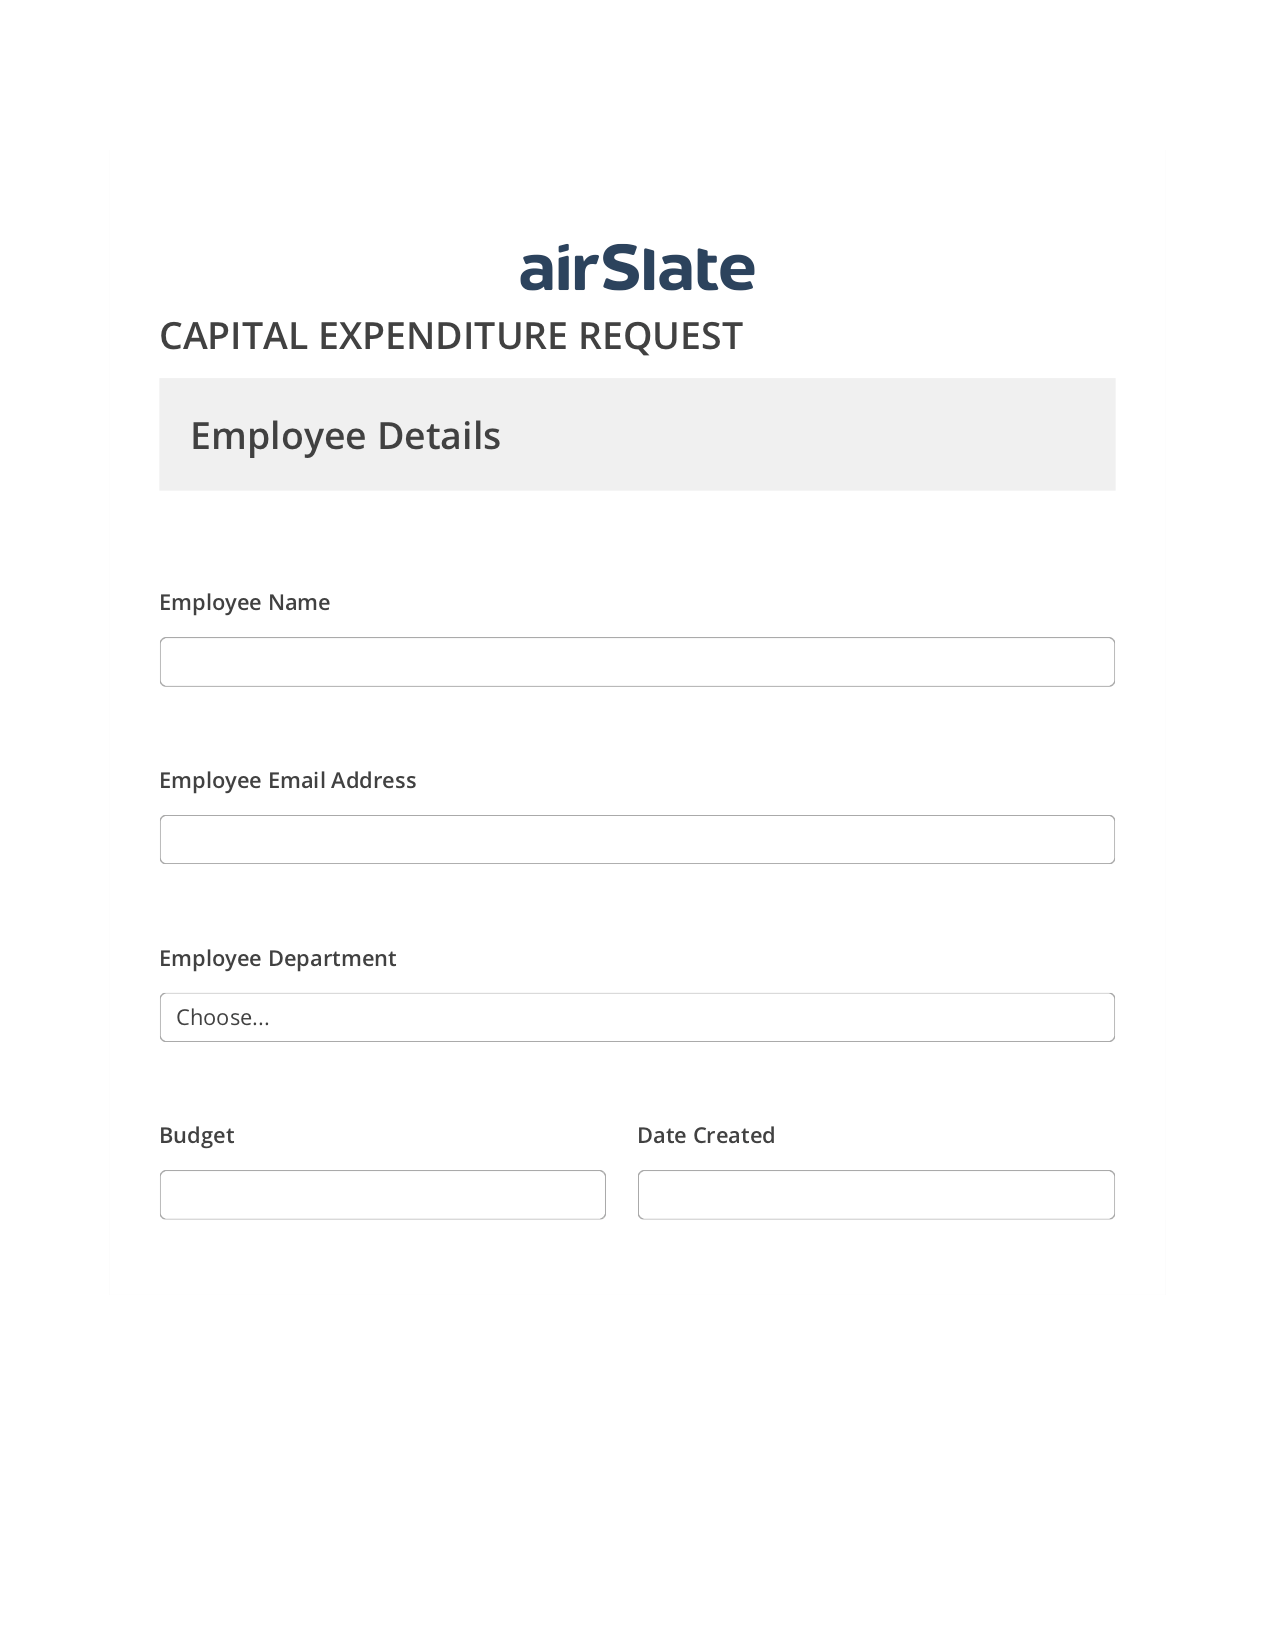 Capital Expenditure Request Approval Flow Create MS Dynamics 365 Records